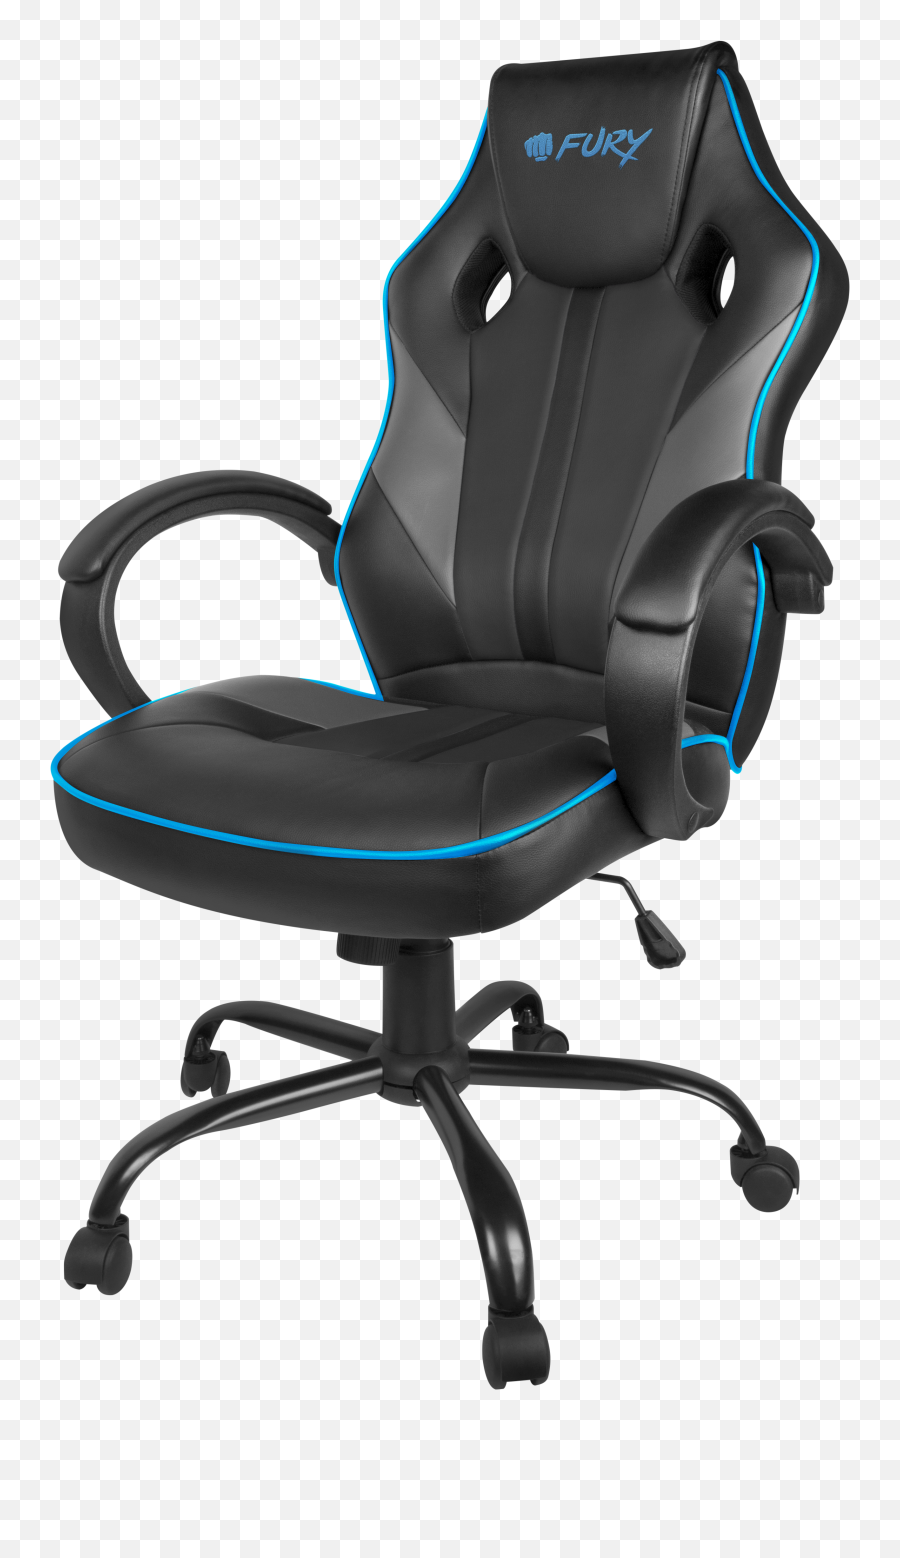 Gaming Chair Avenger M - Fury Chair Avenger M Png,Gaming Chair Png